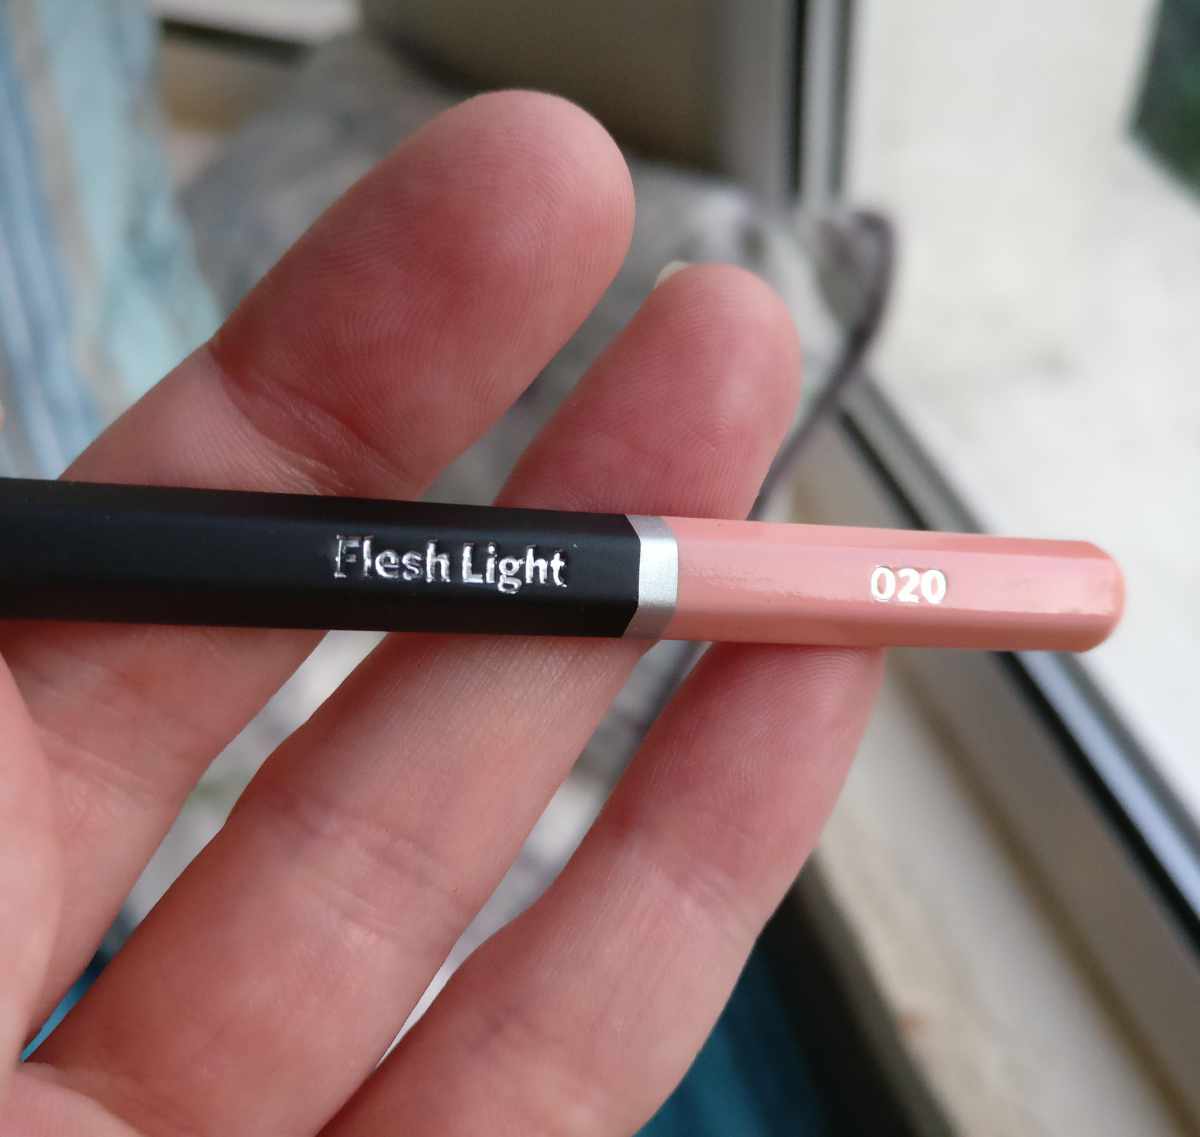 The choice of name for this colouring pencil